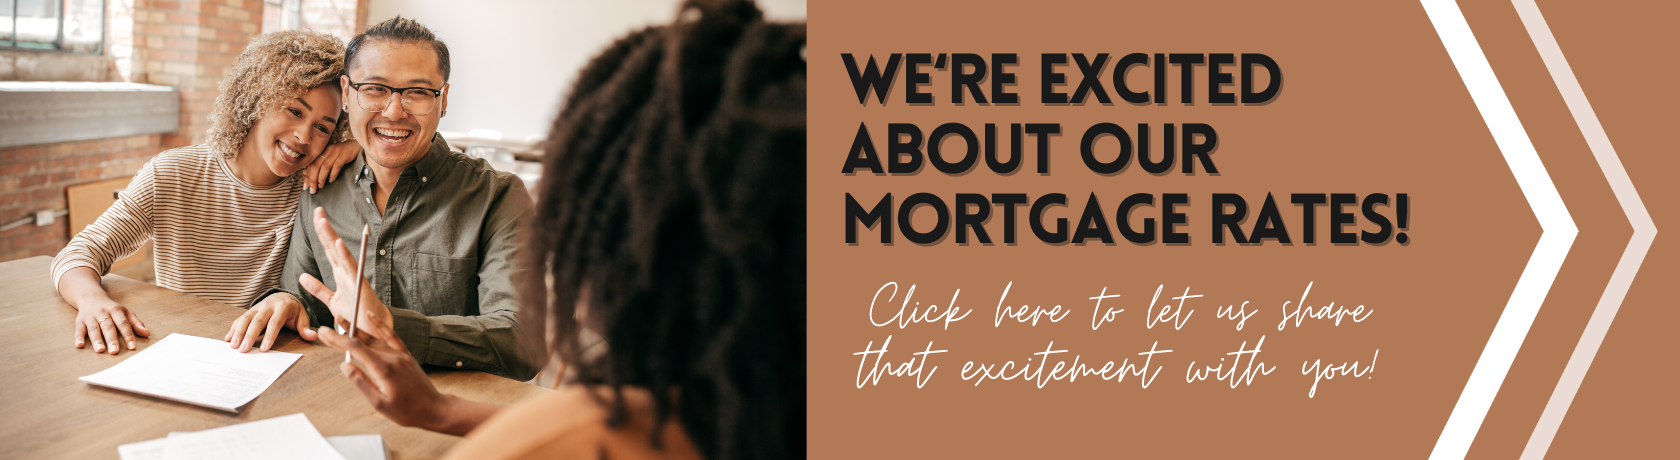 We're excited about our mortgage rates
Click here
and let us share that excitement with you